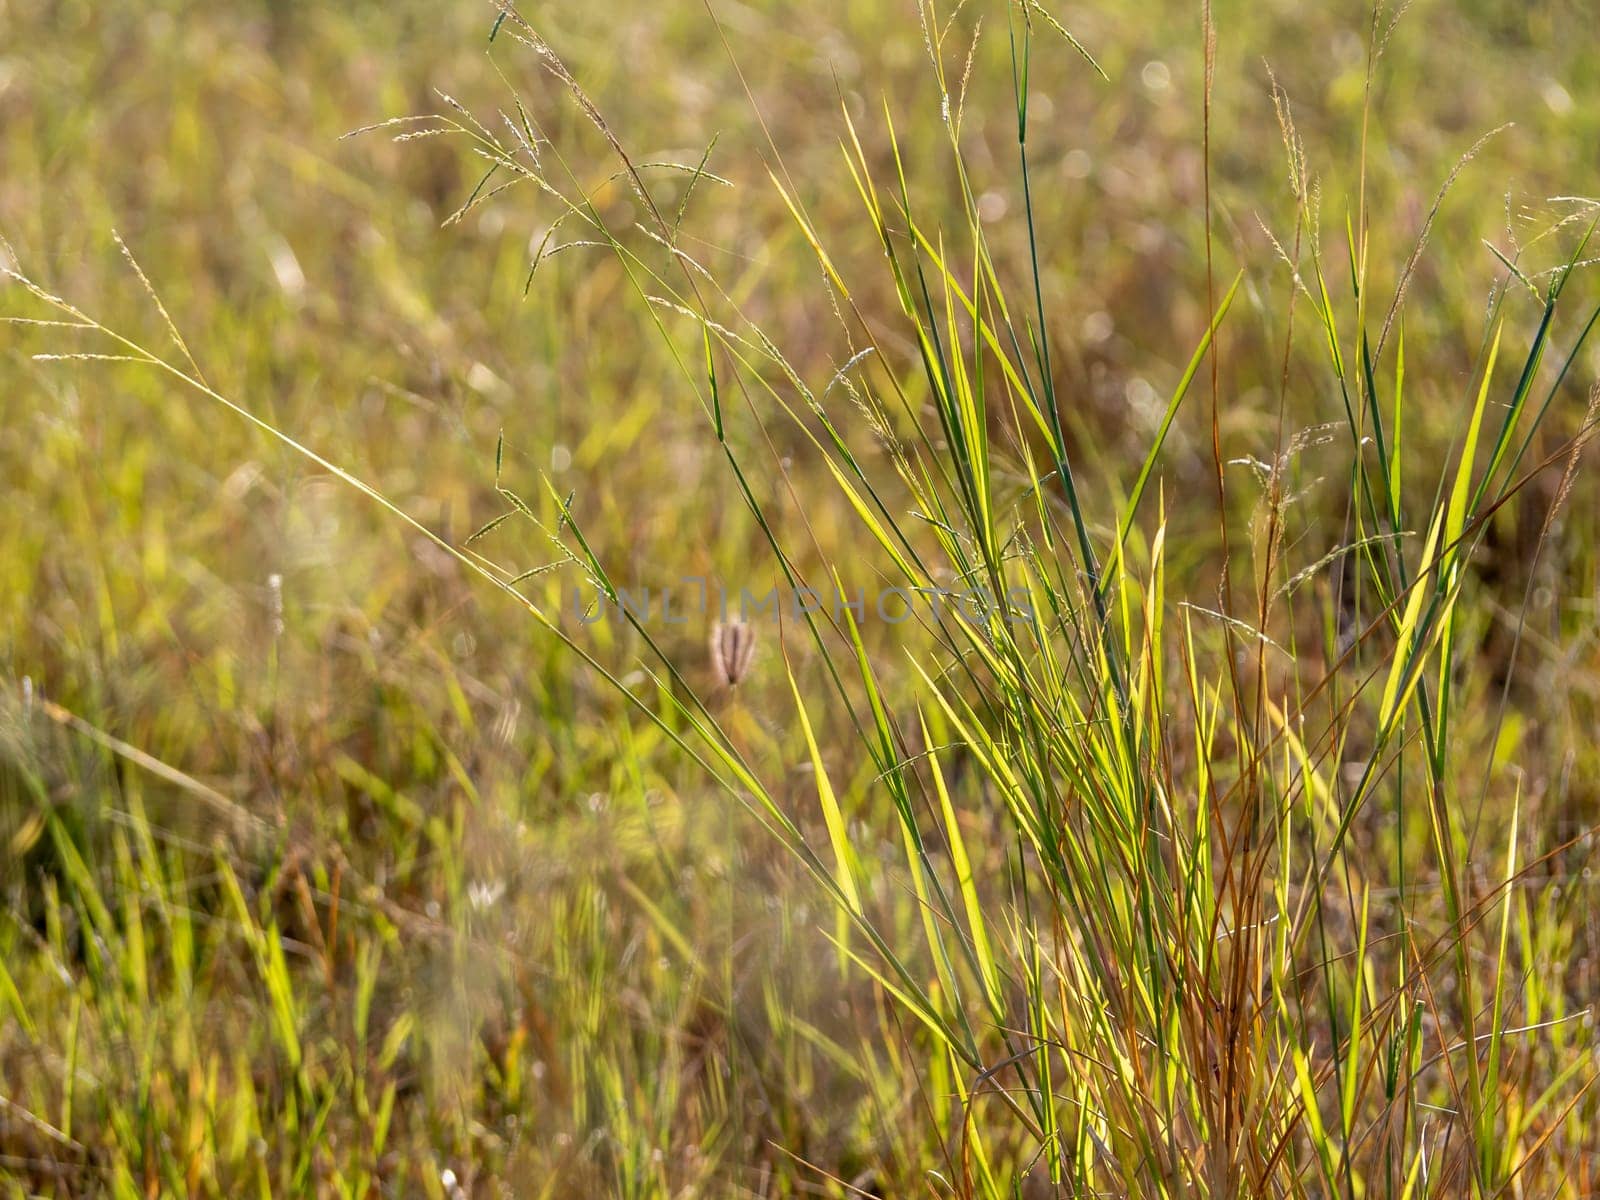 Grass flowers in the wasteland along the road